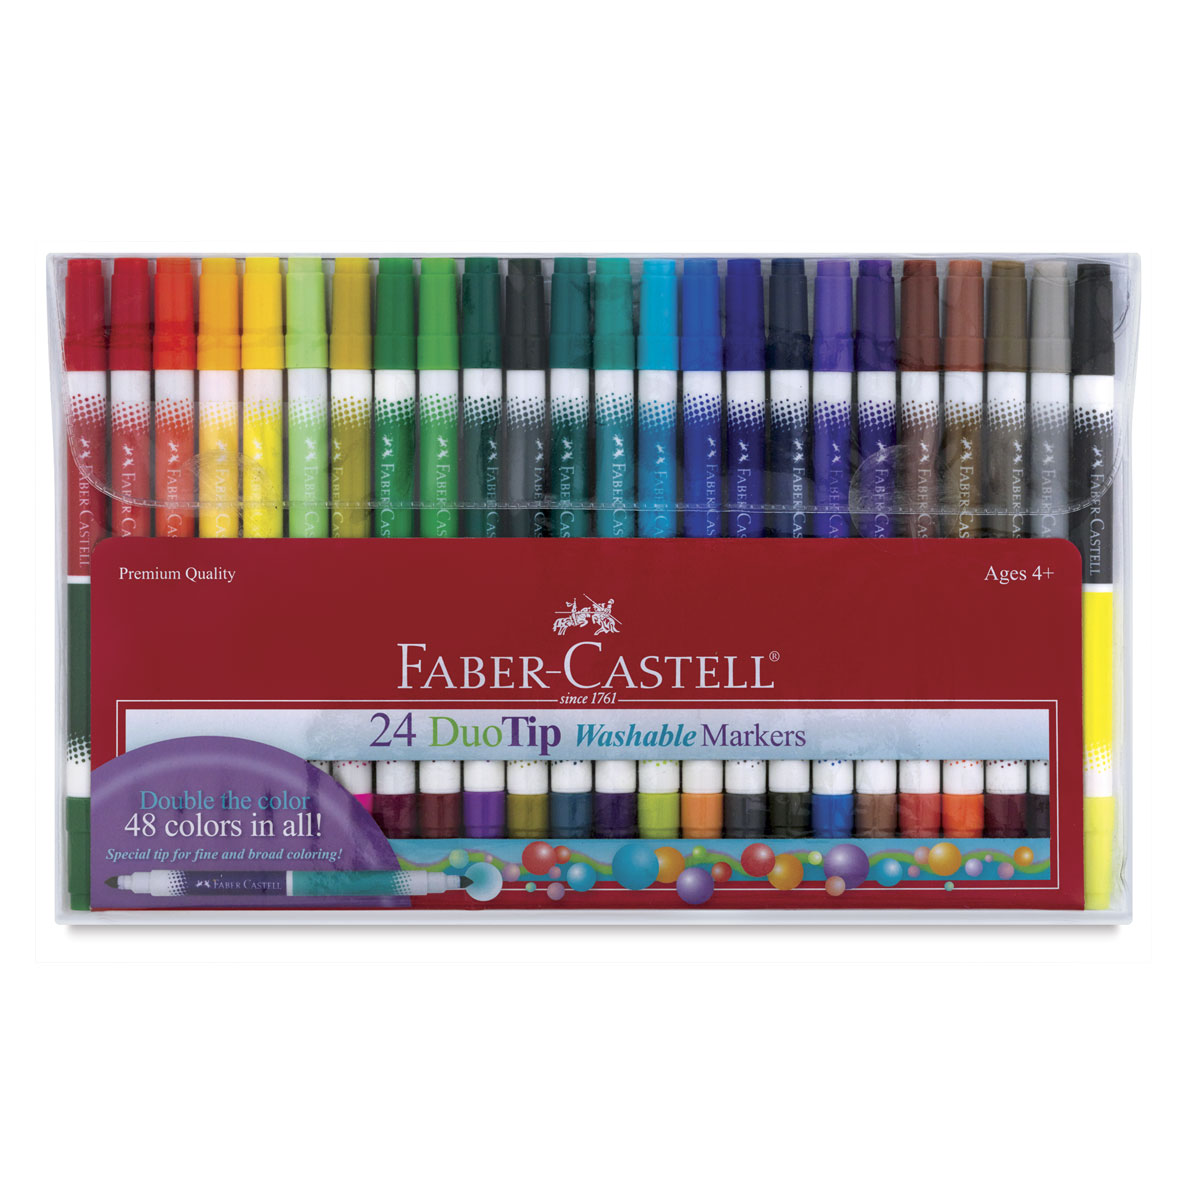 Faber-Castell FC153024 24 DuoTip Washable Markers 